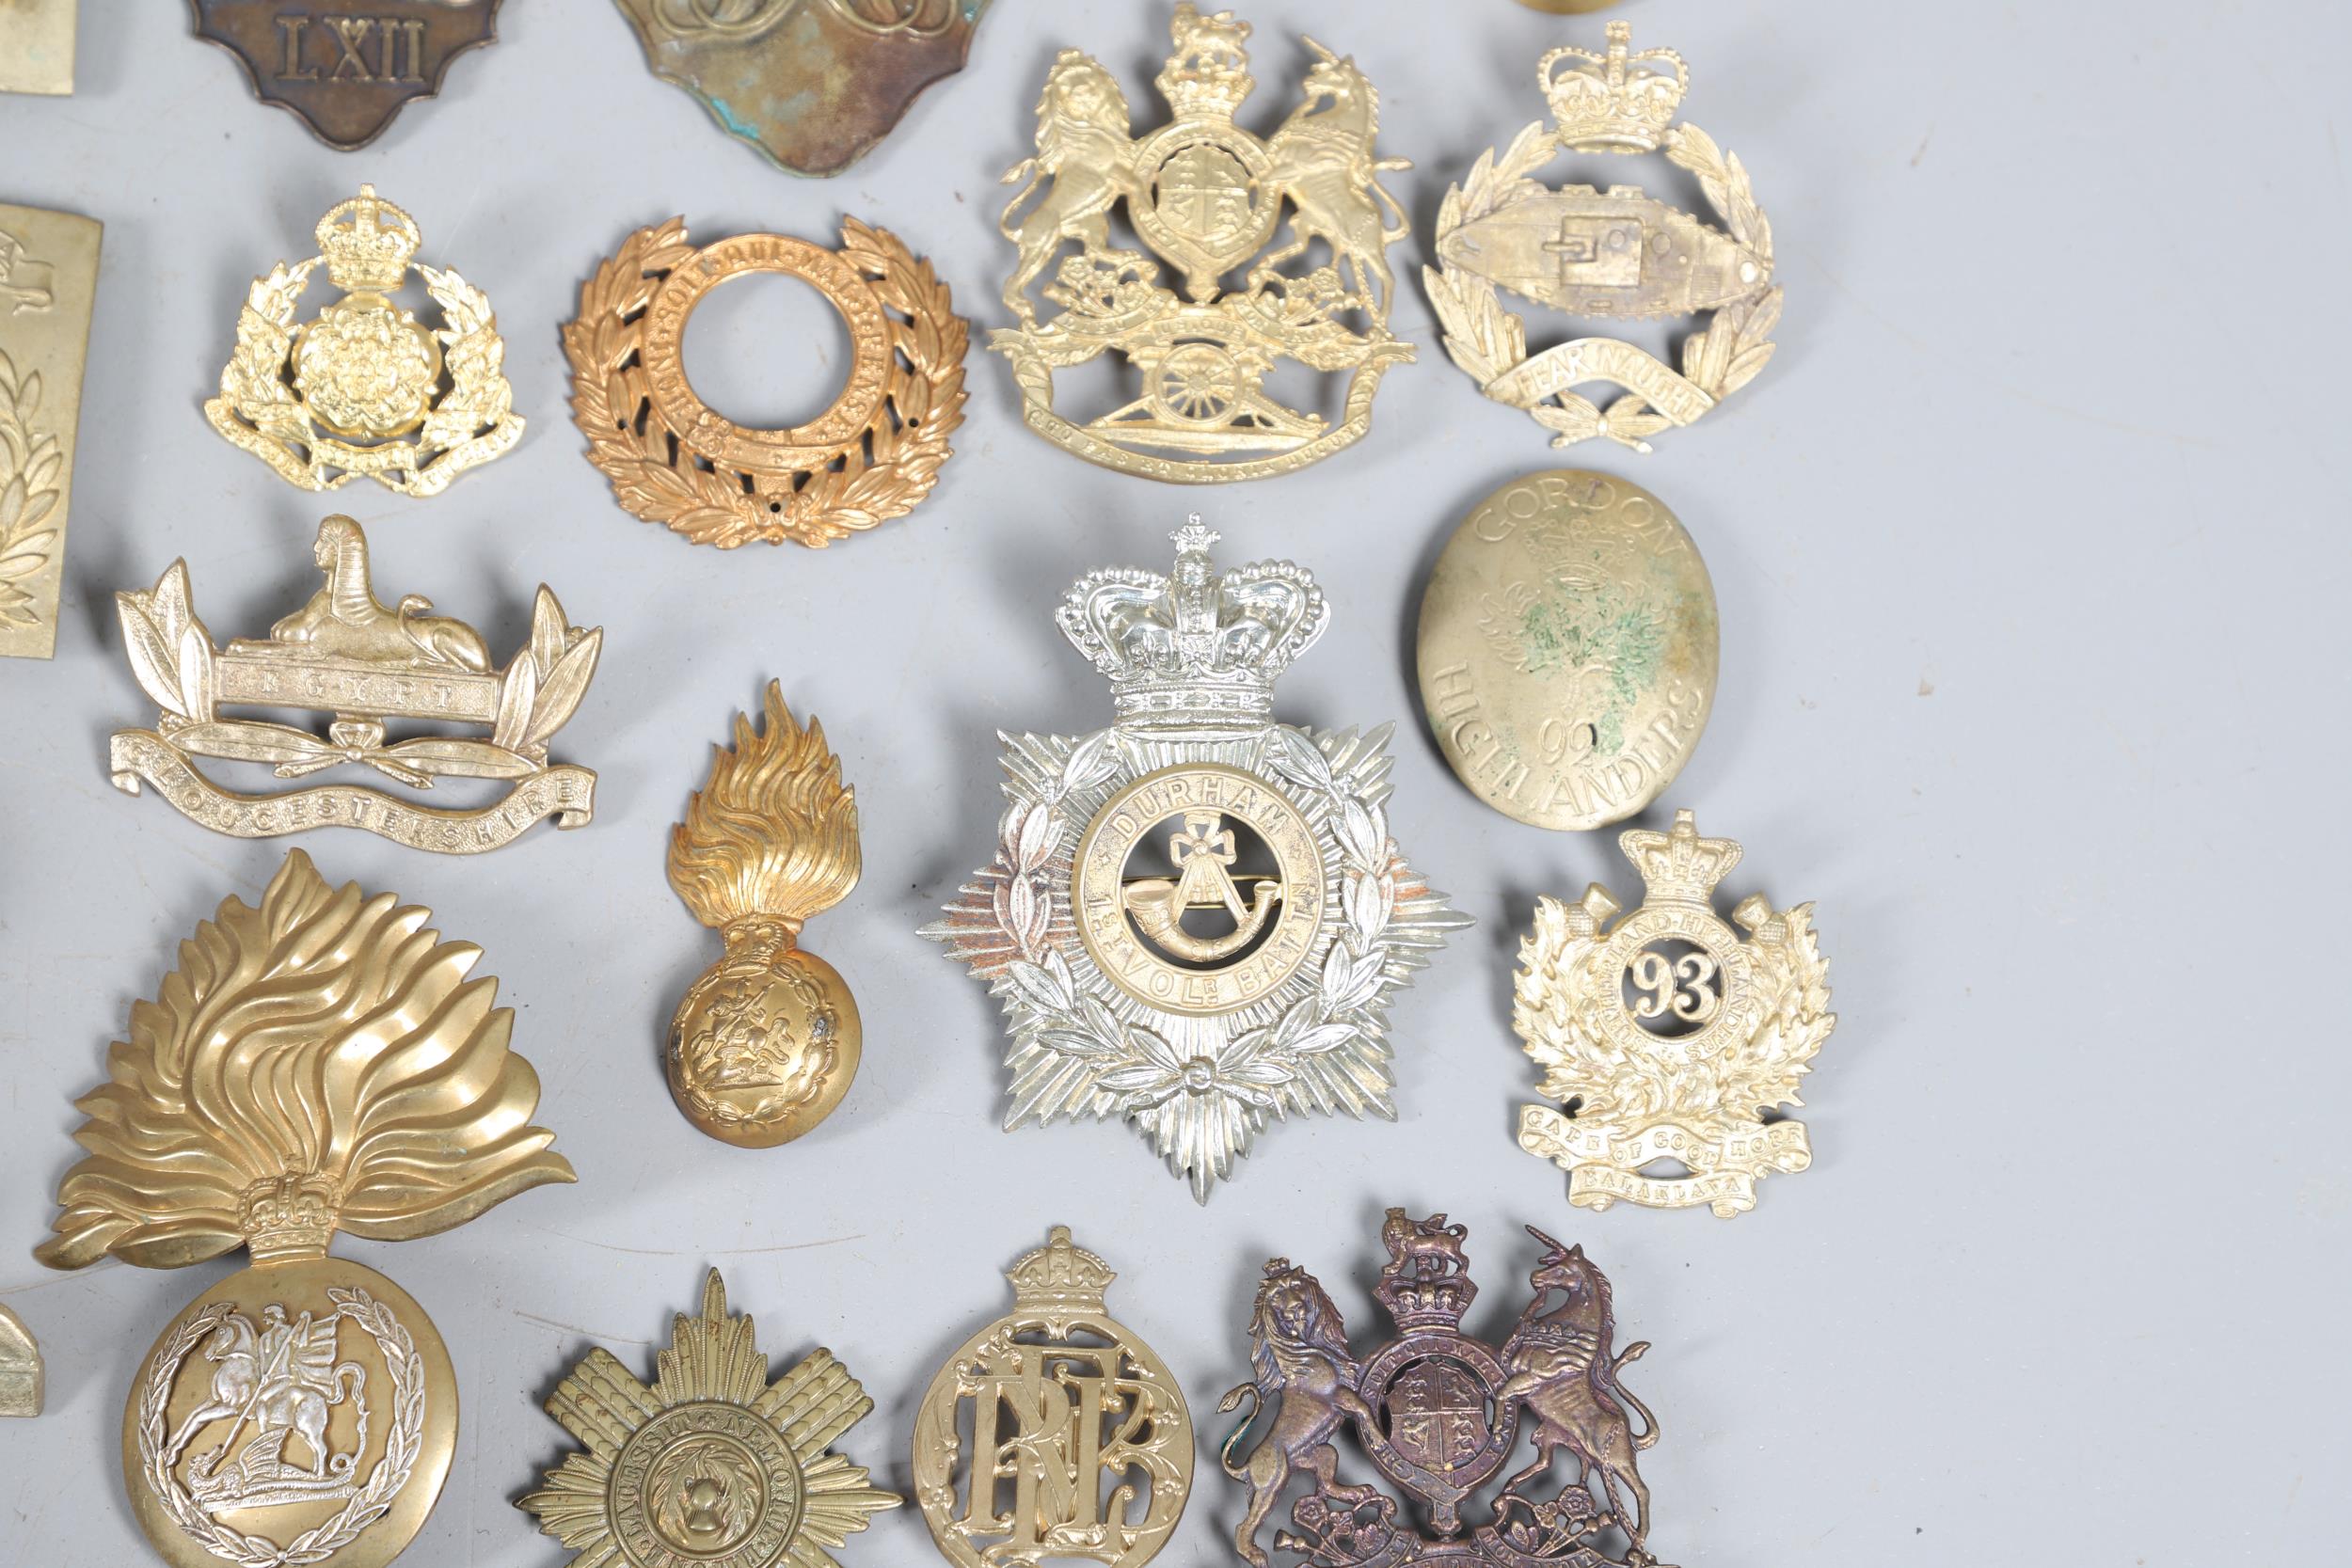 A COLLECTION OF VICTORIAN STYLE HELMET PLATES AND OTHER BADGES. - Image 5 of 10